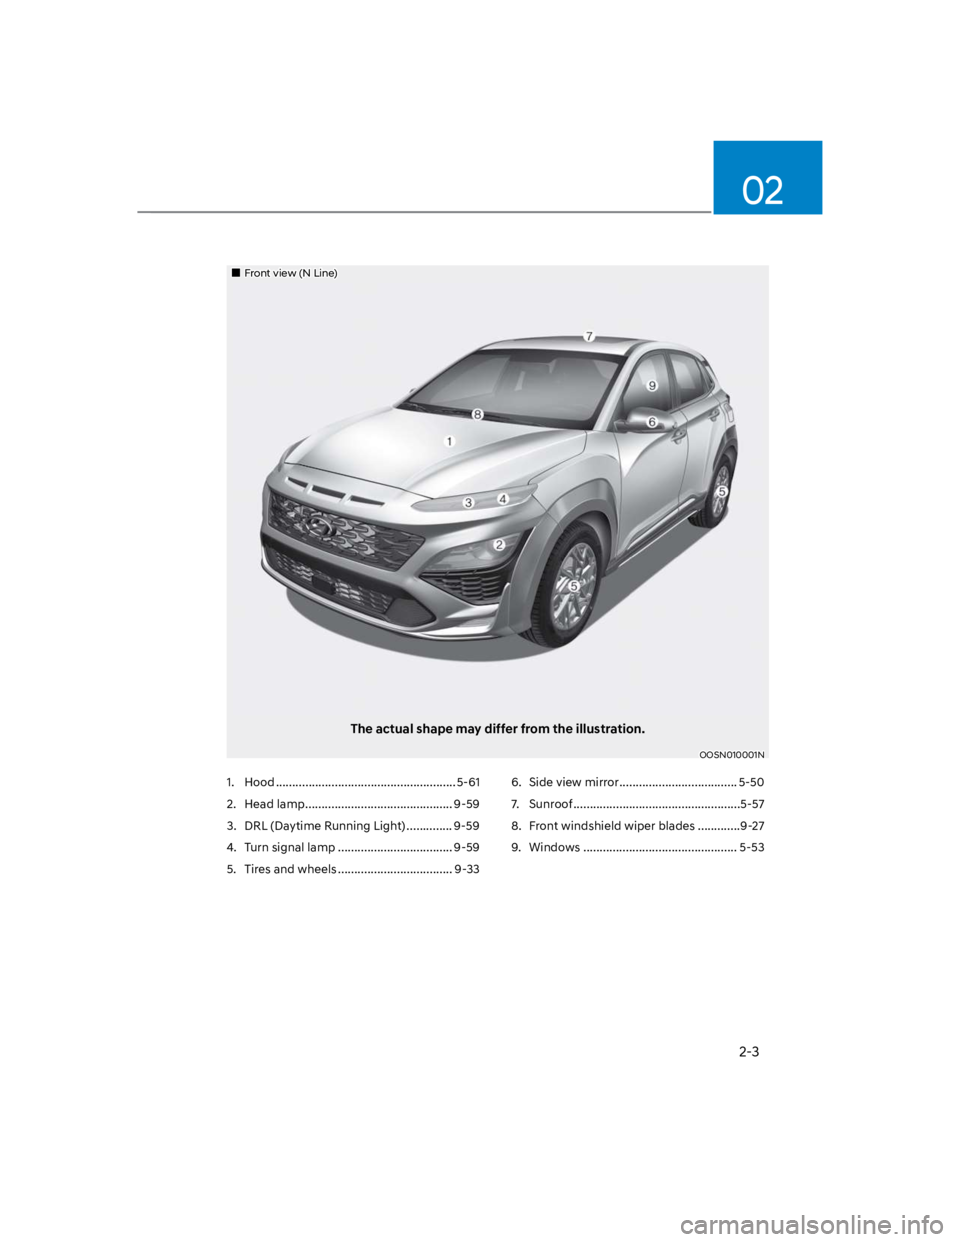 HYUNDAI KONA 2022  Owners Manual 2-3
02
Front view (N Line)
The actual shape may differ from the illustration.
OOSN010001N
1.  Hood ....................................................... 5-61
2.  Head lamp ..........................